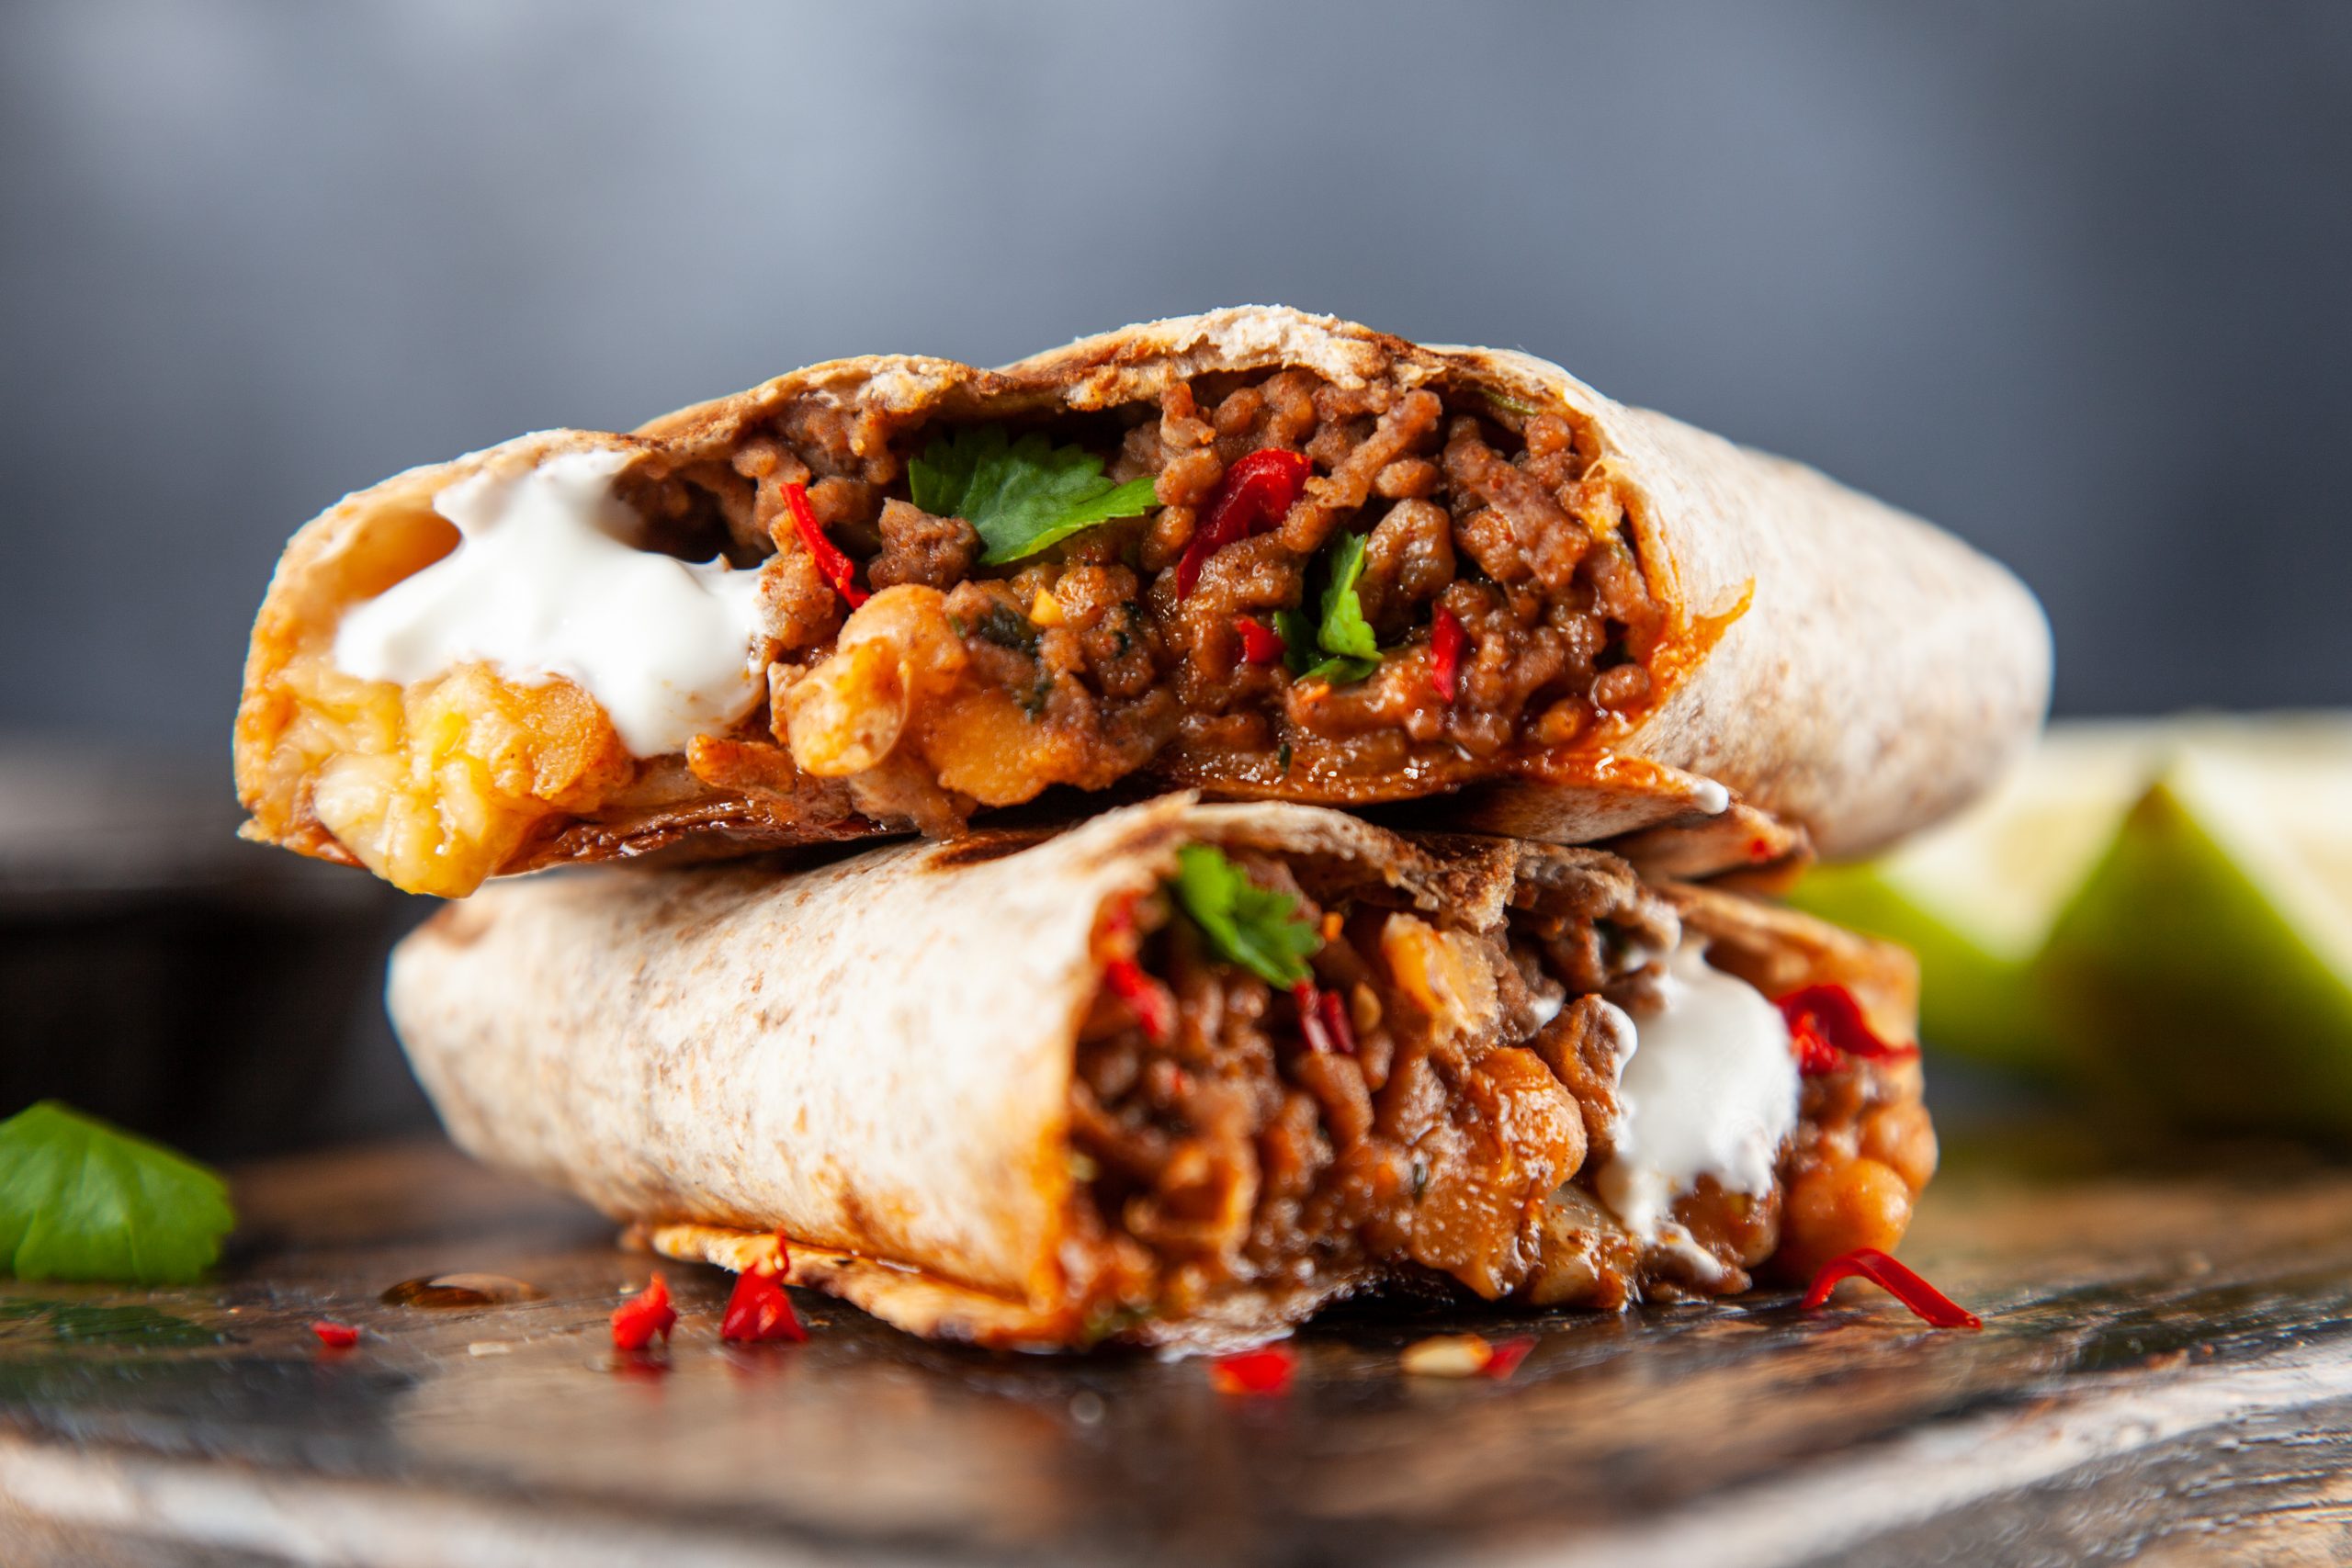 Mission-Style Burritos | Isle of Wight Meat Co.